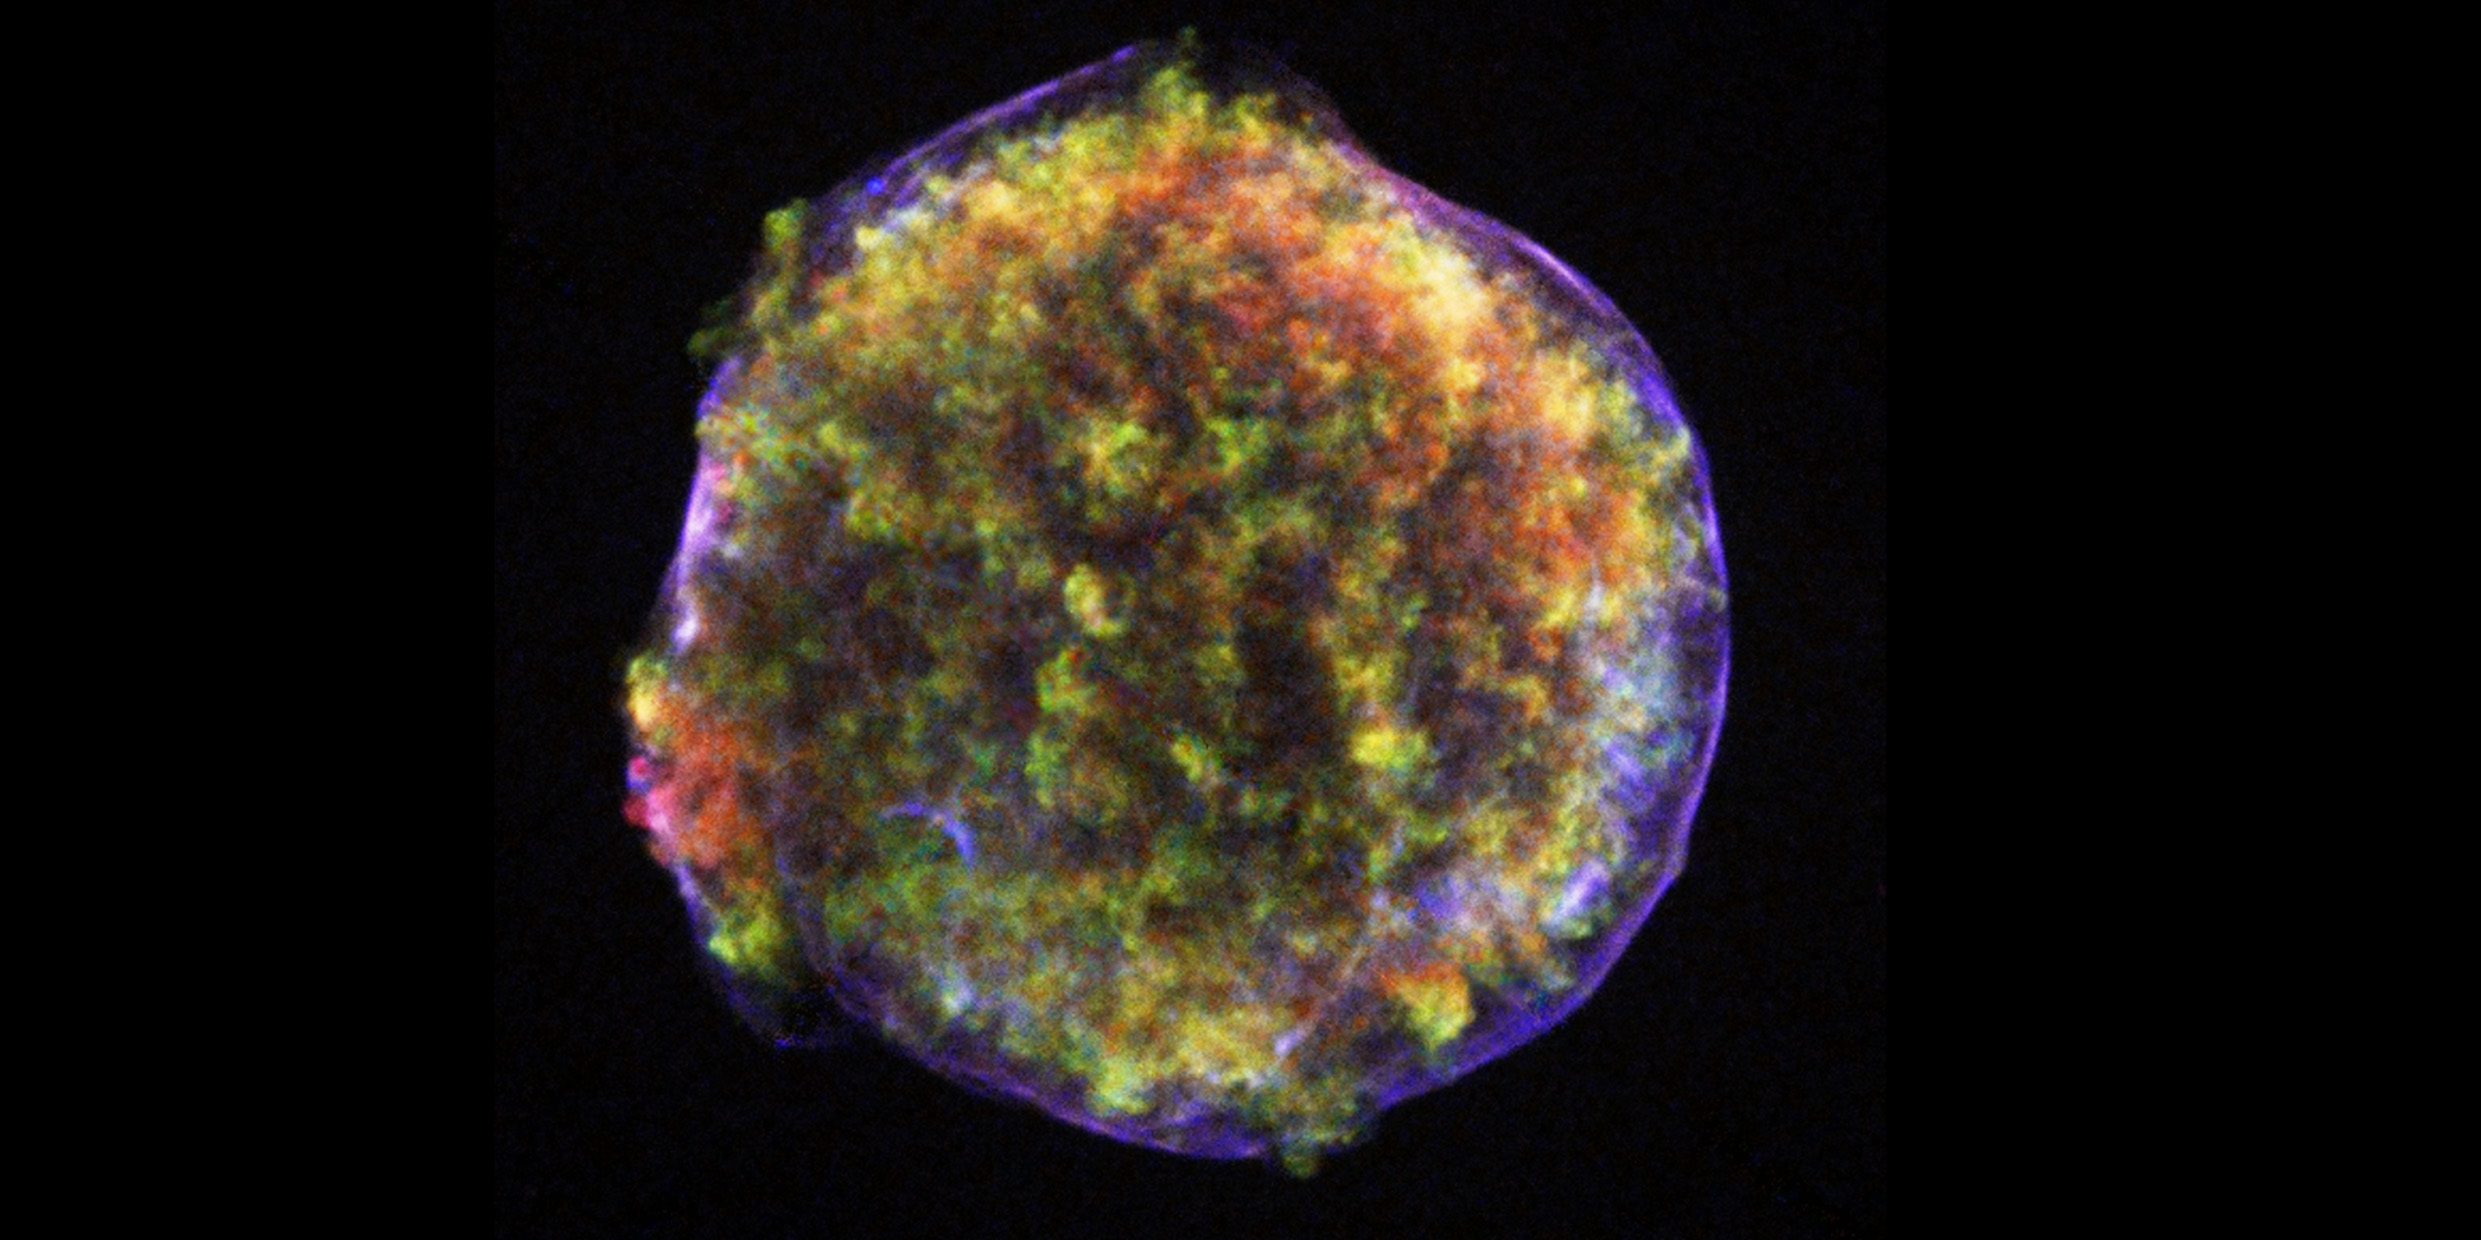 Remnant of supernova 1572 as seen in X-ray light